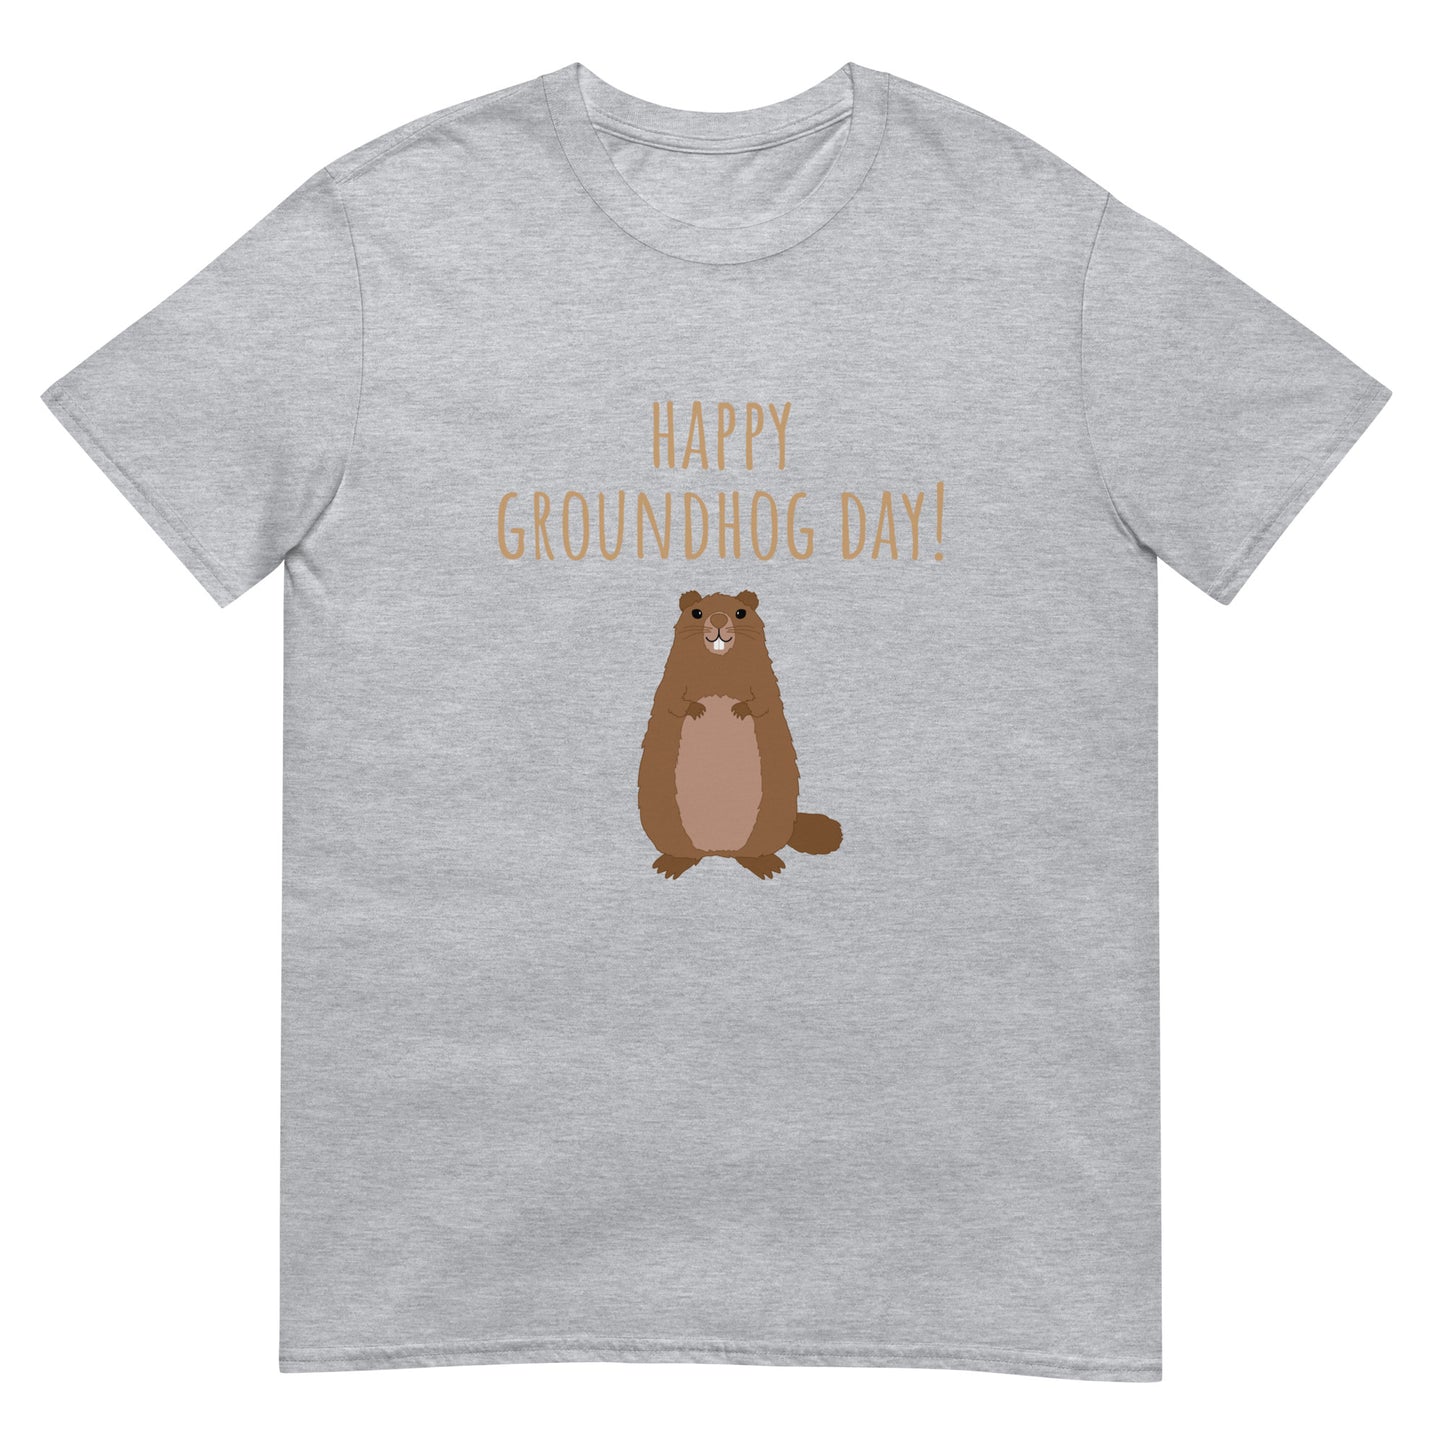 Is it Spring Yet? Groundhog T-Shirt